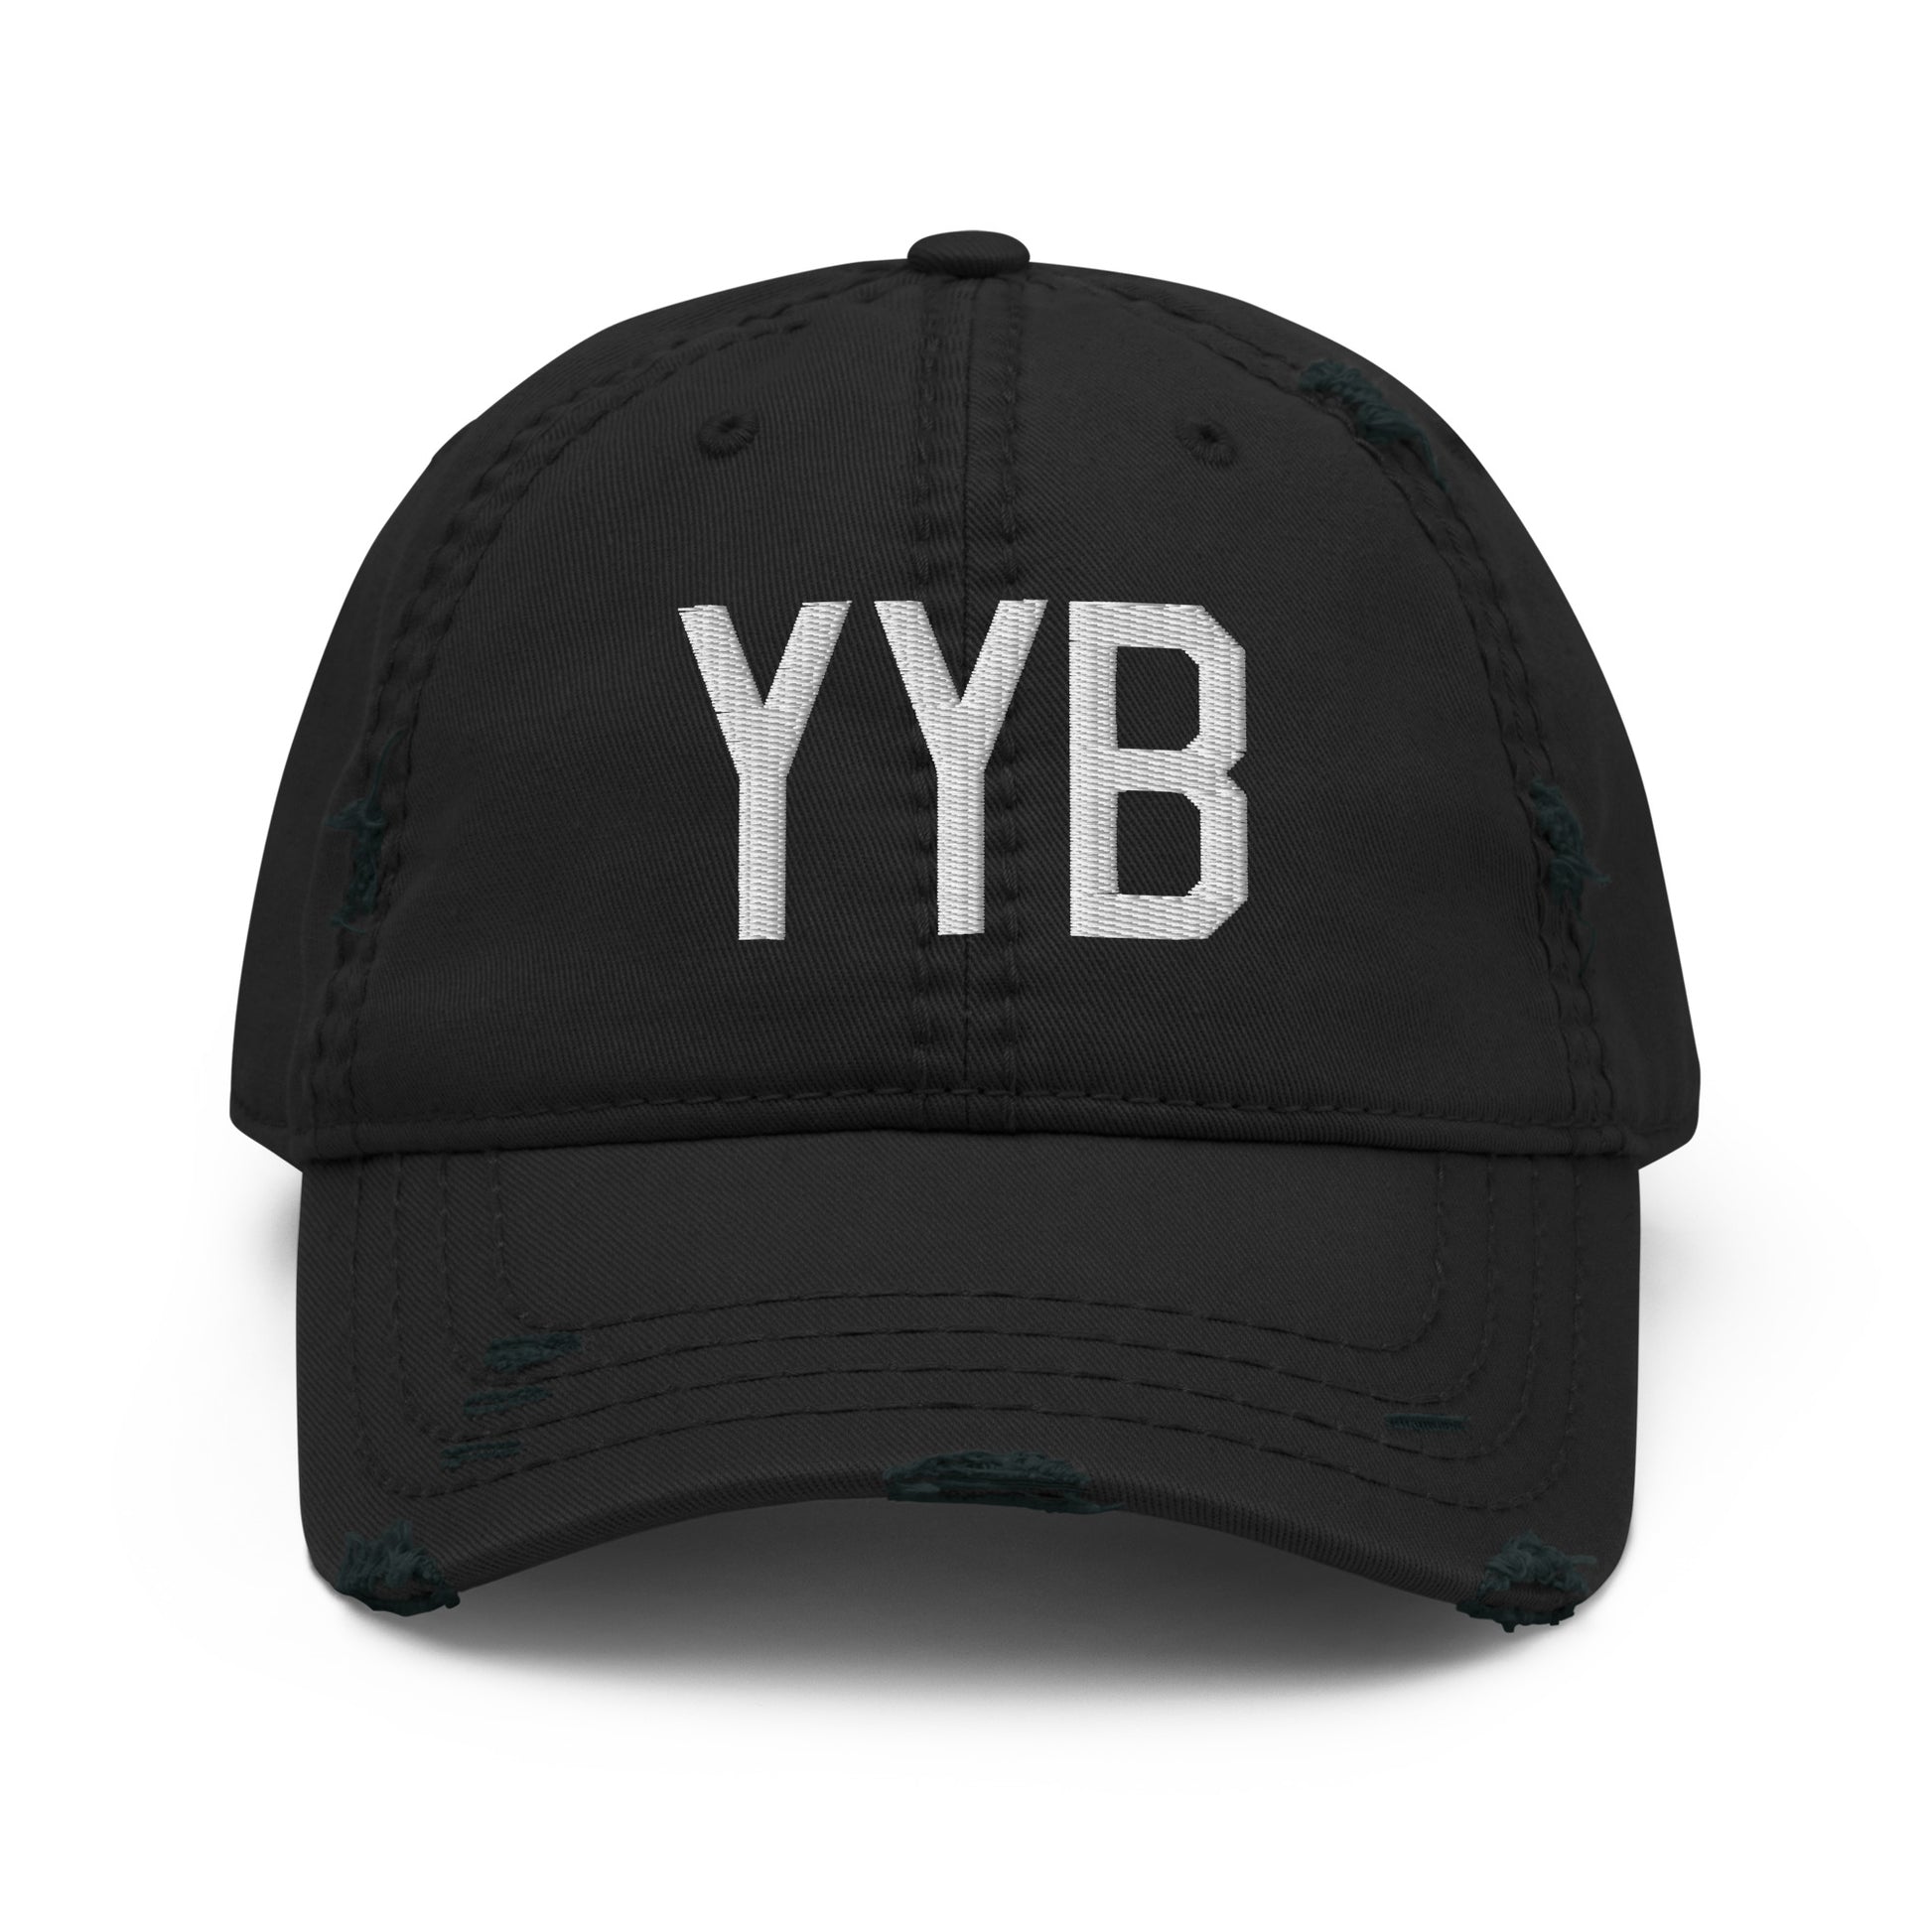 Airport Code Distressed Hat - White • YYB North Bay • YHM Designs - Image 10